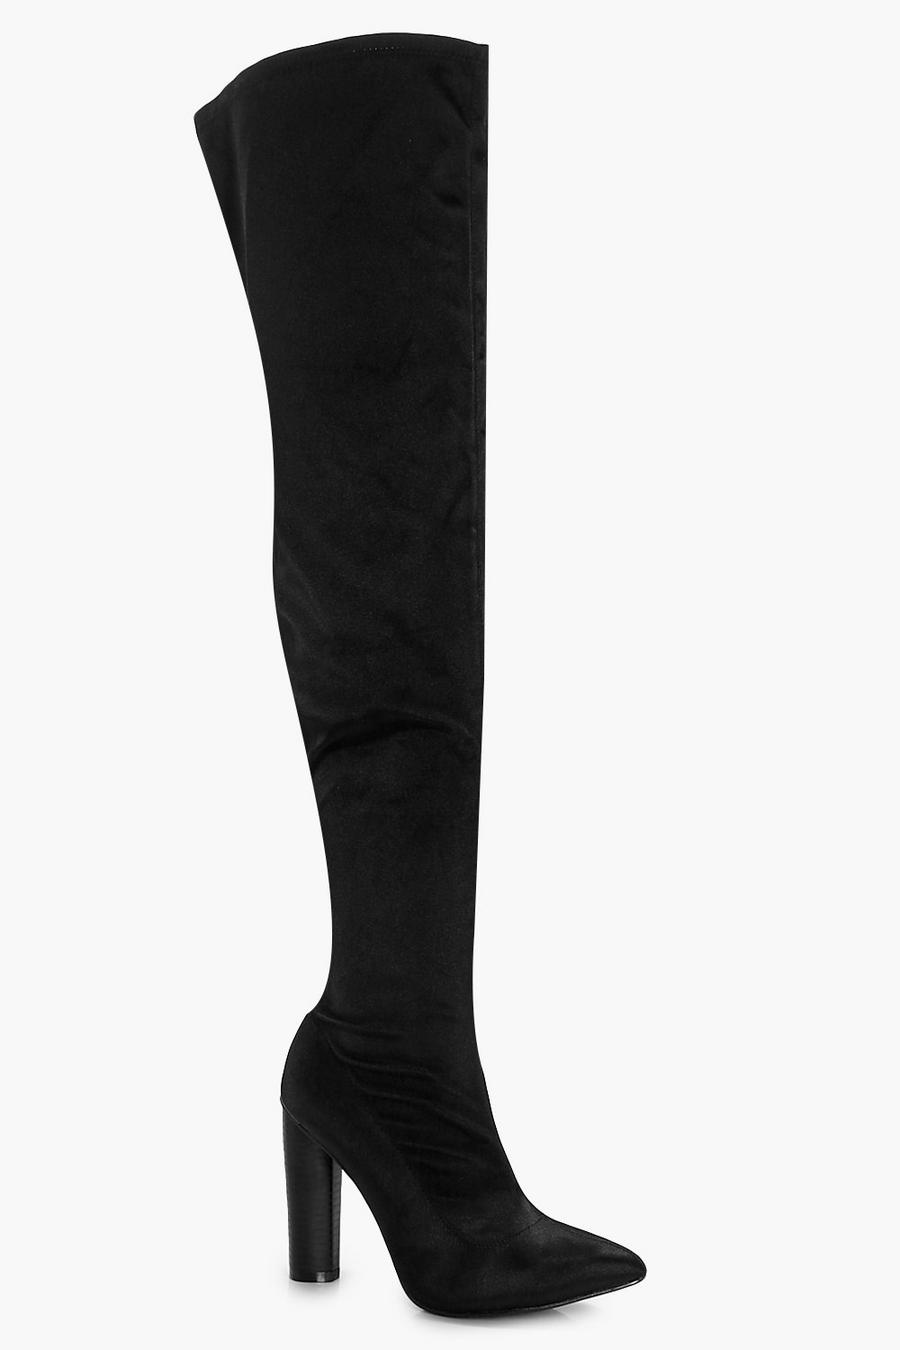 Ladies Womens Satin Lycra Thigh Block High Heel Stretch Over The Knee Boots Size 